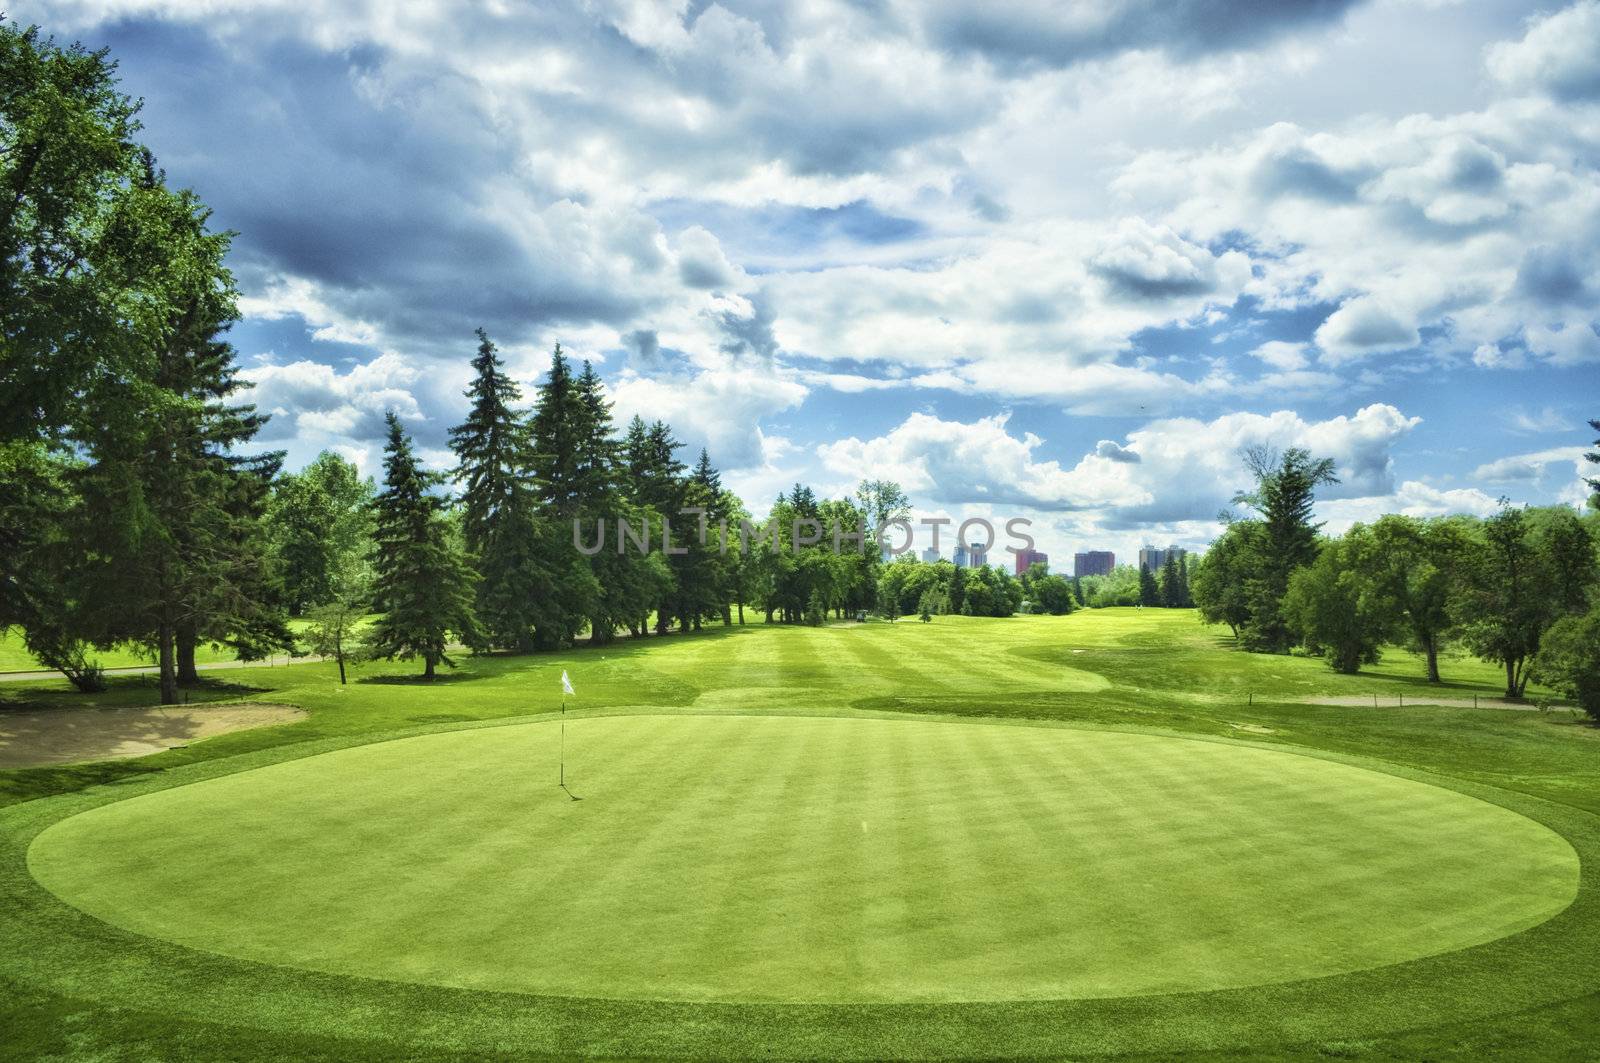 A full view of a golf course green in the middle of a summer afternoon.